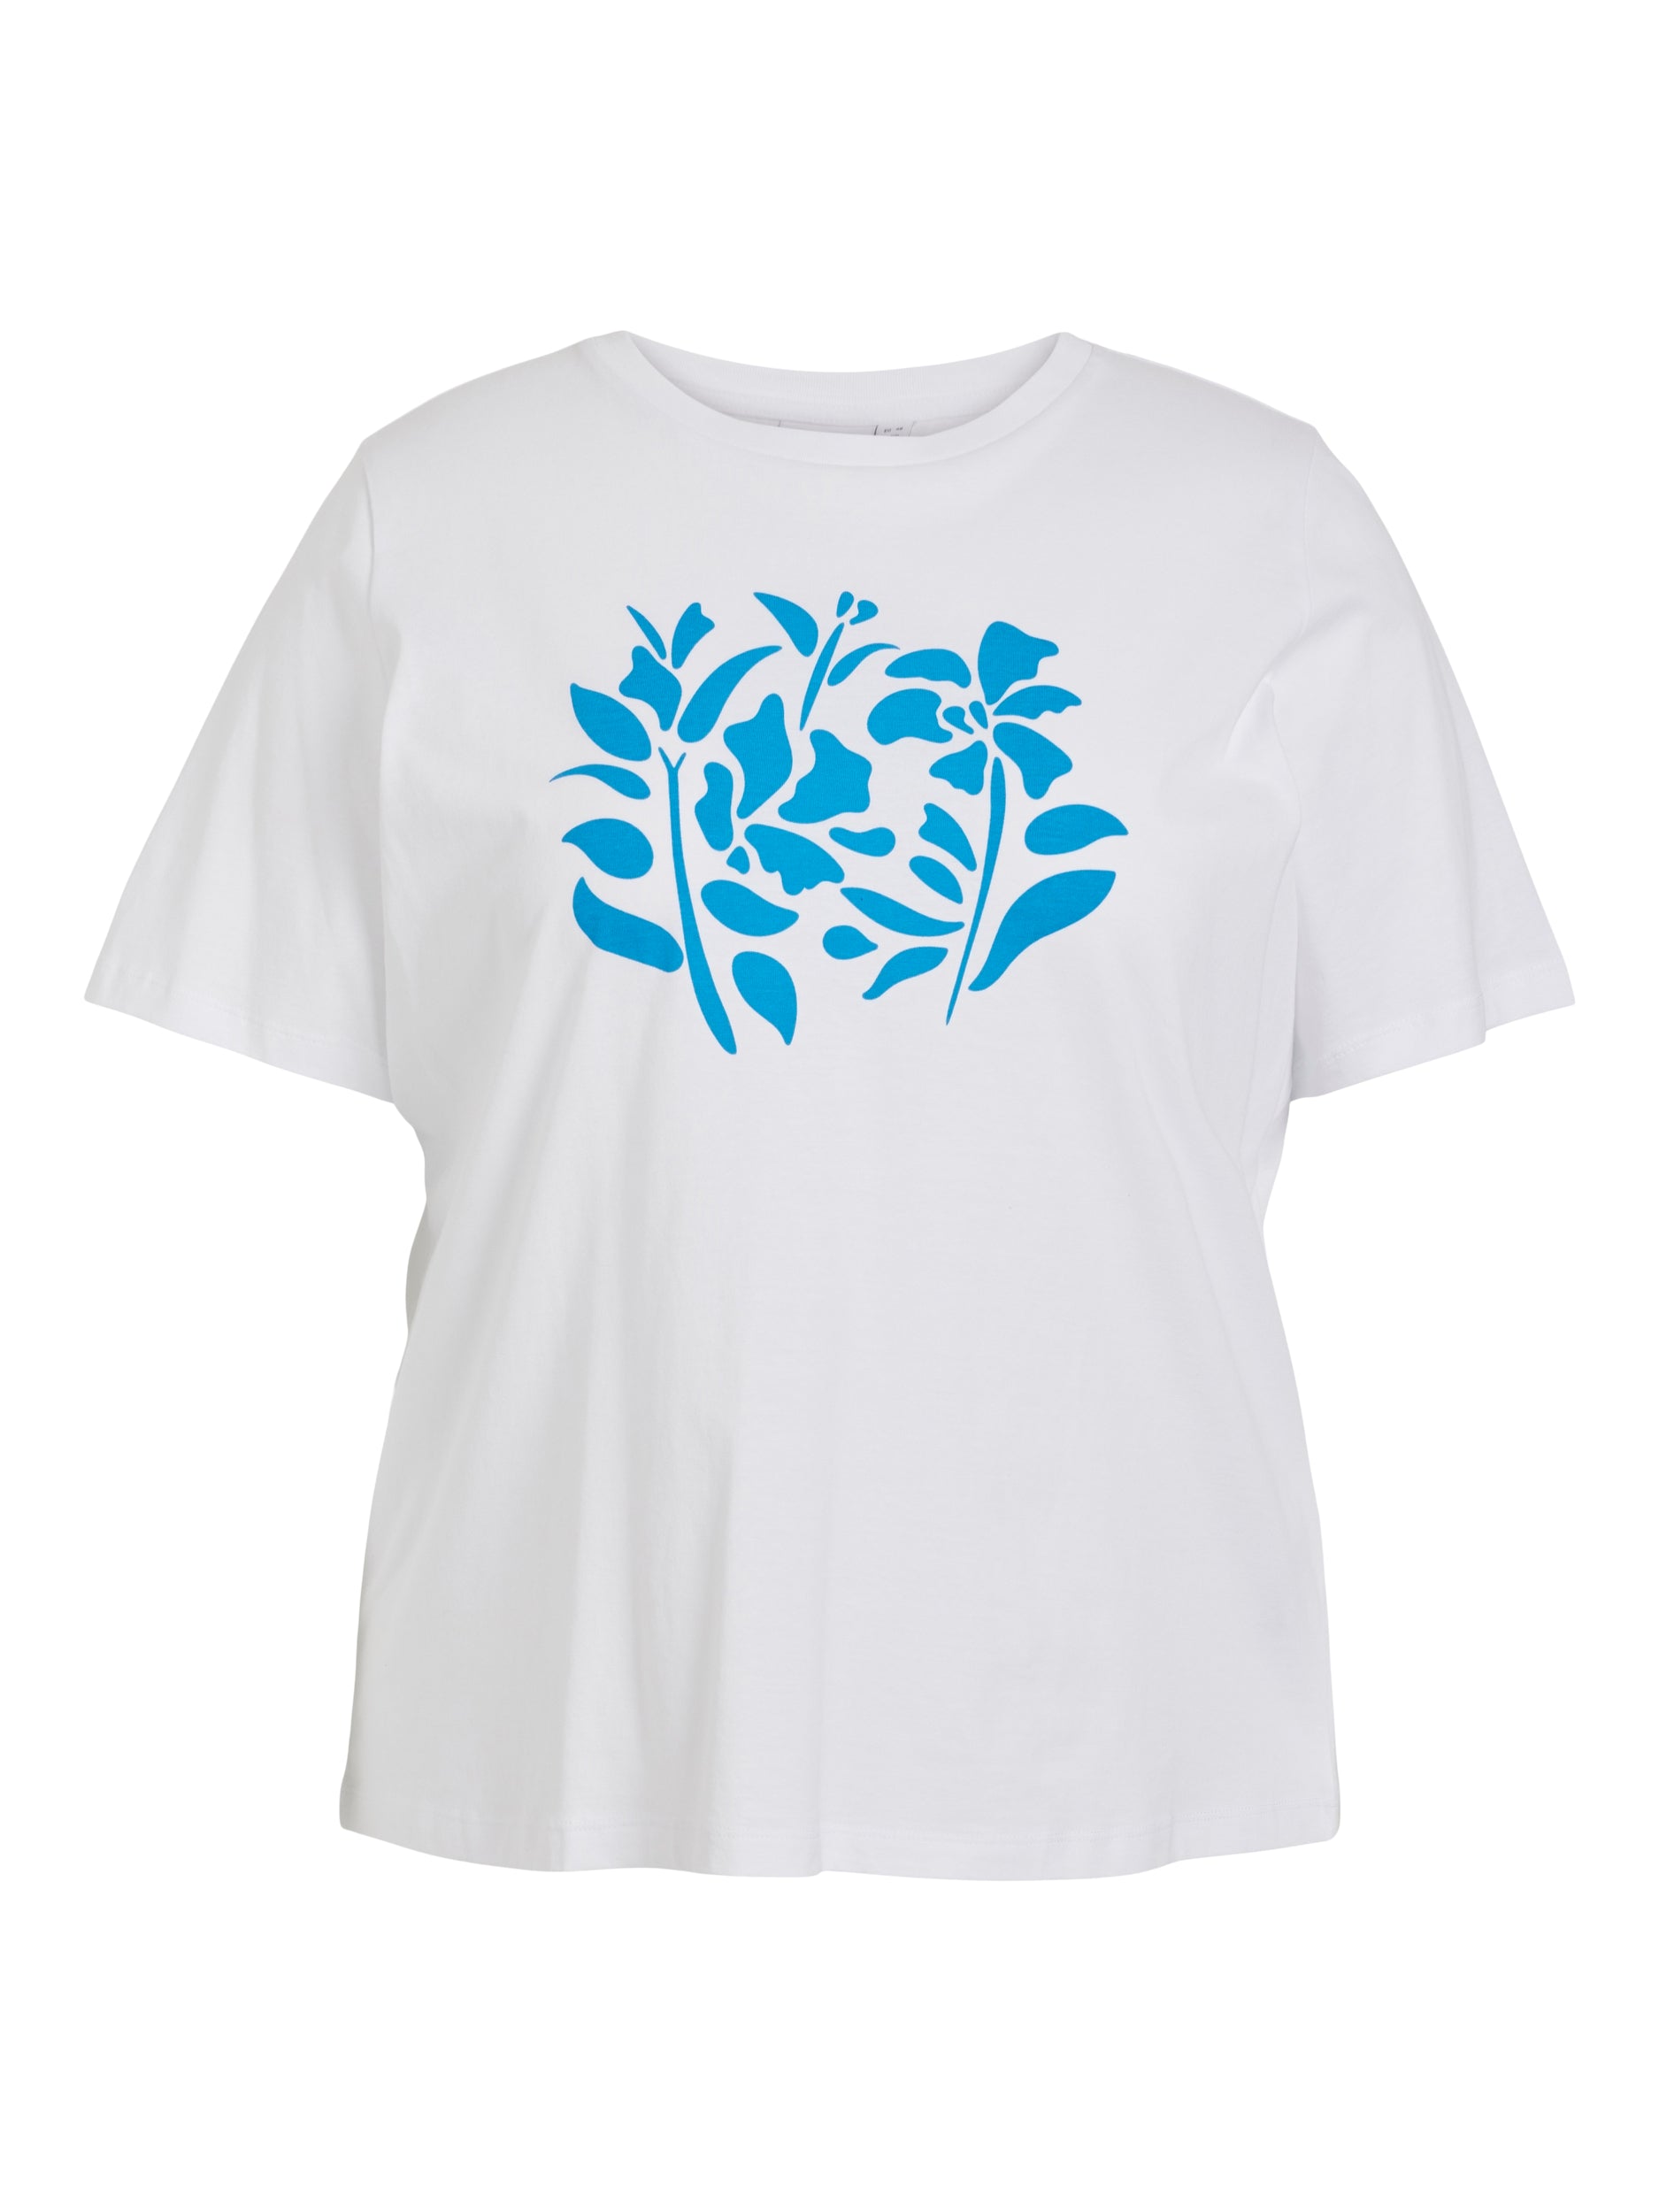 BILLY ABSTRACT TSHIRT (WHITE/BLUE)